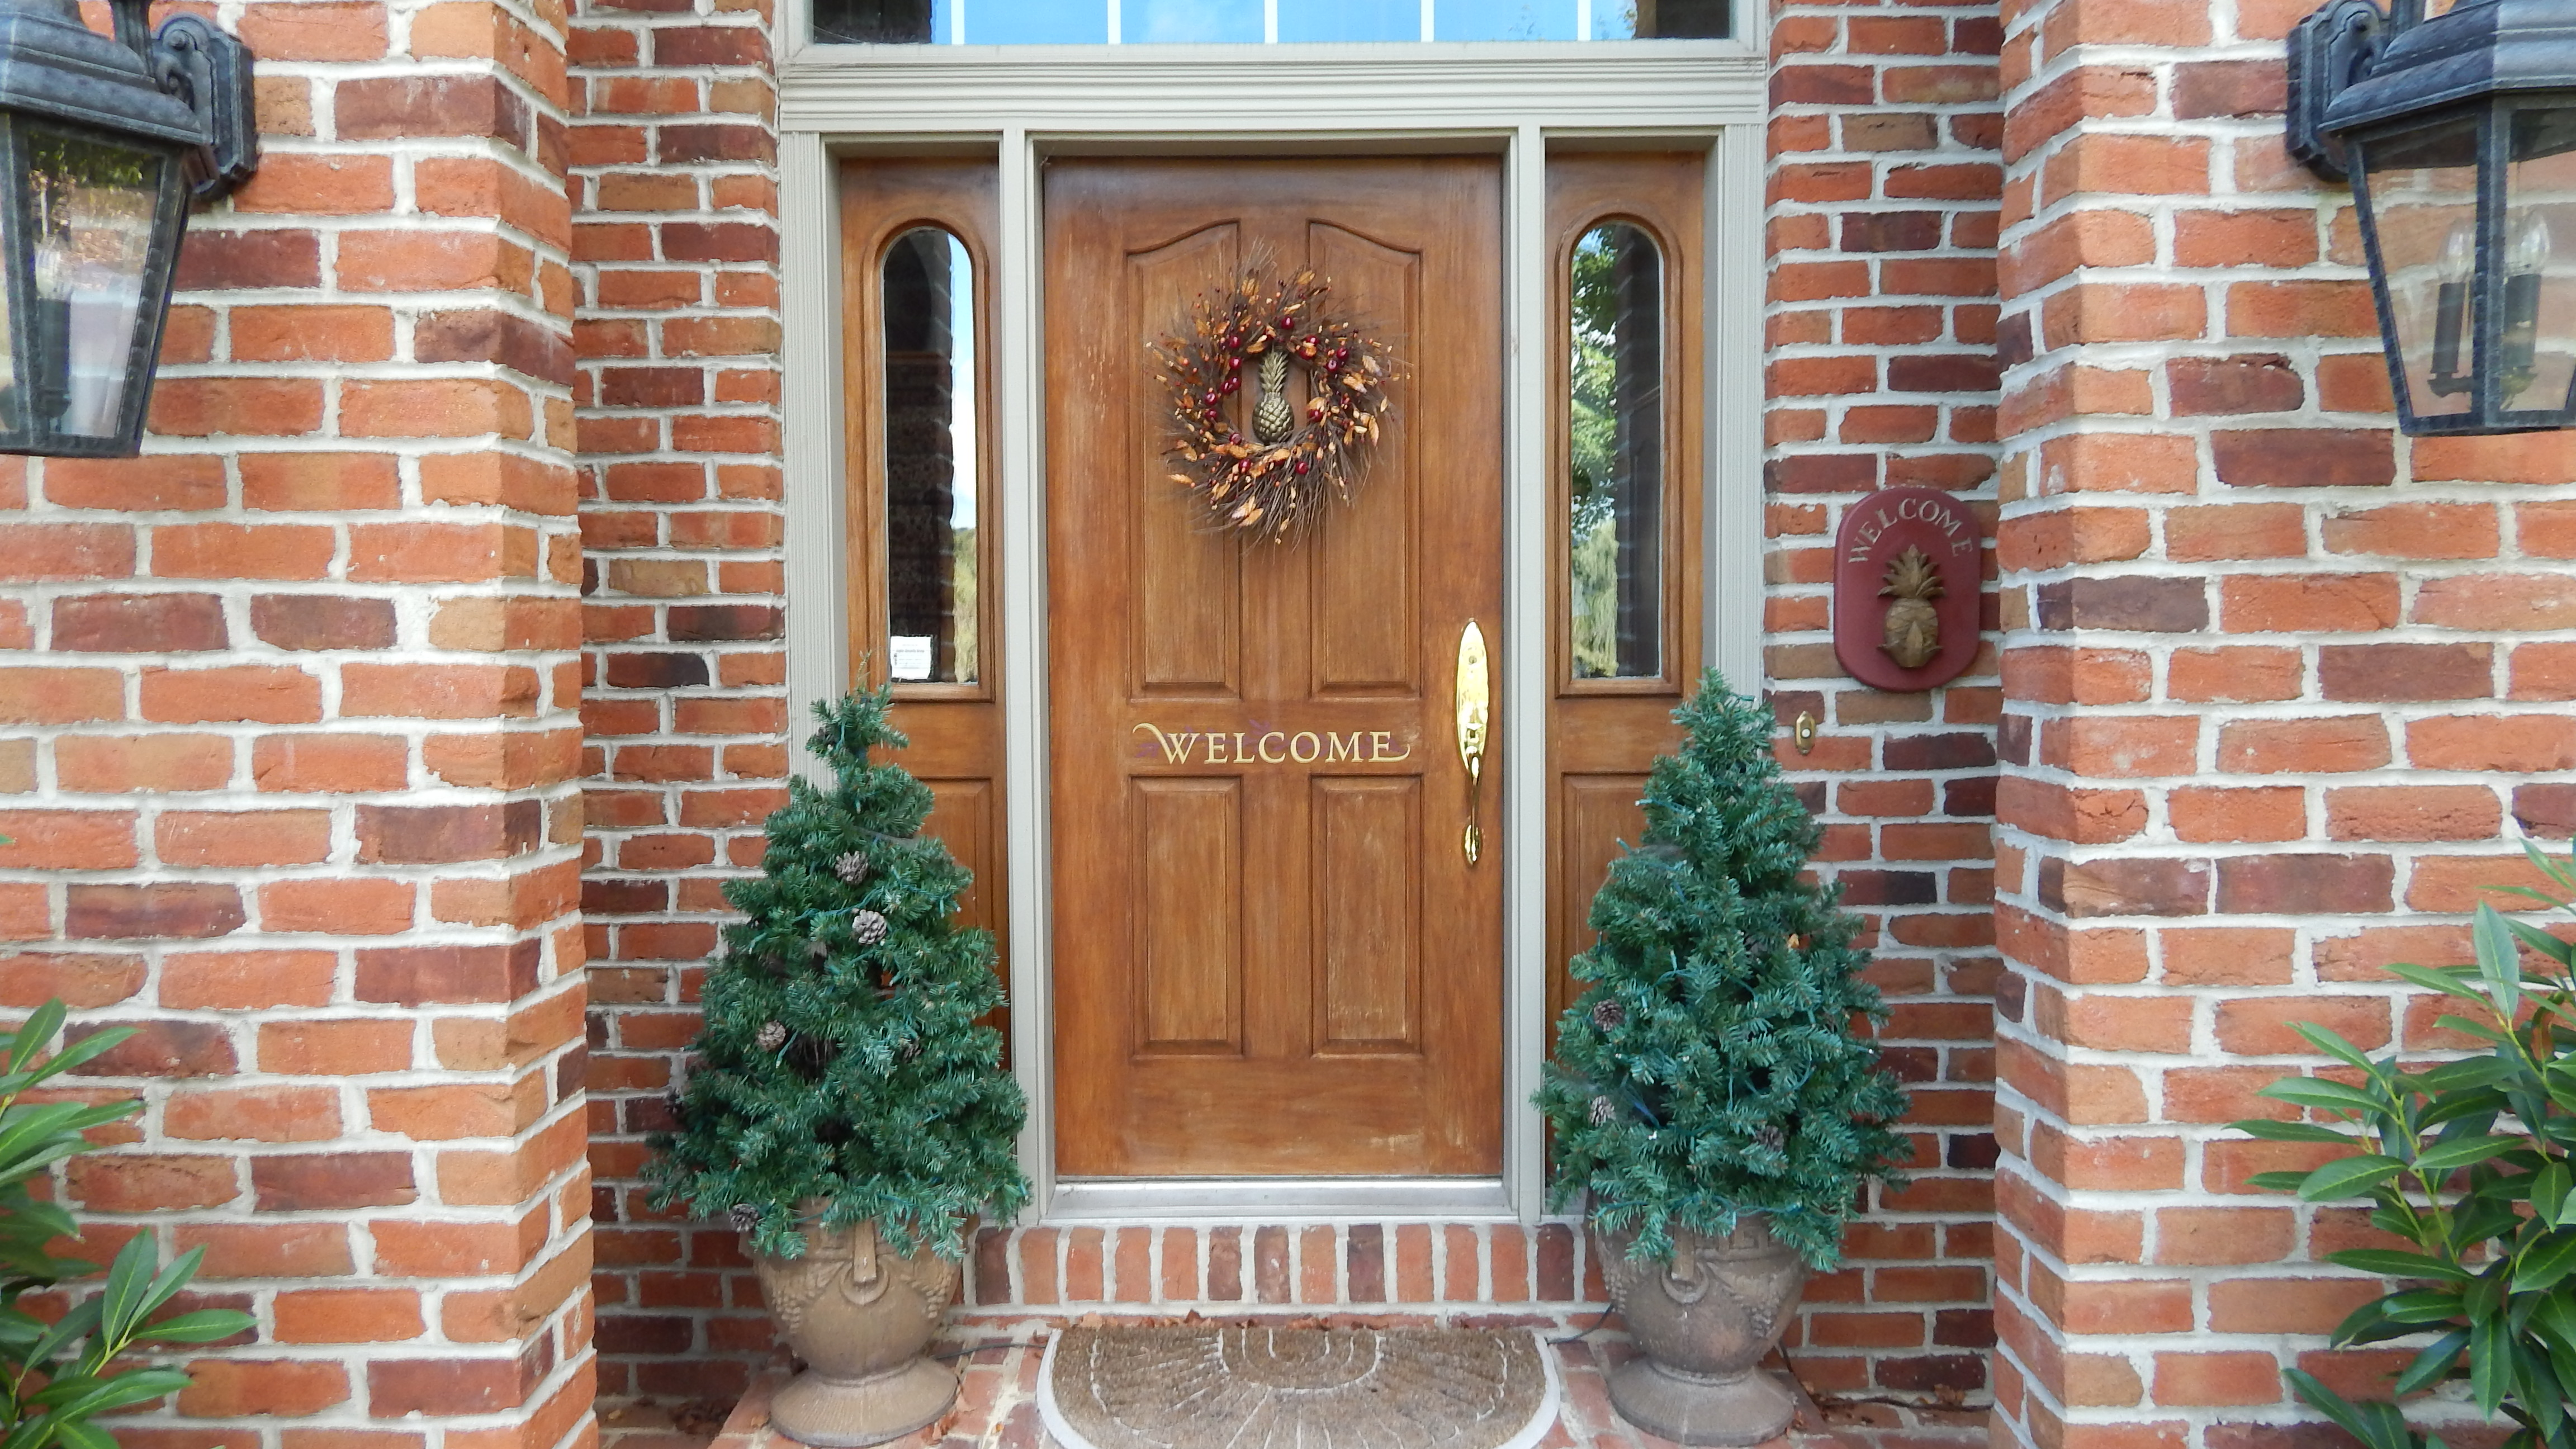 Door replacement by ASJ employees in Hanover, PA